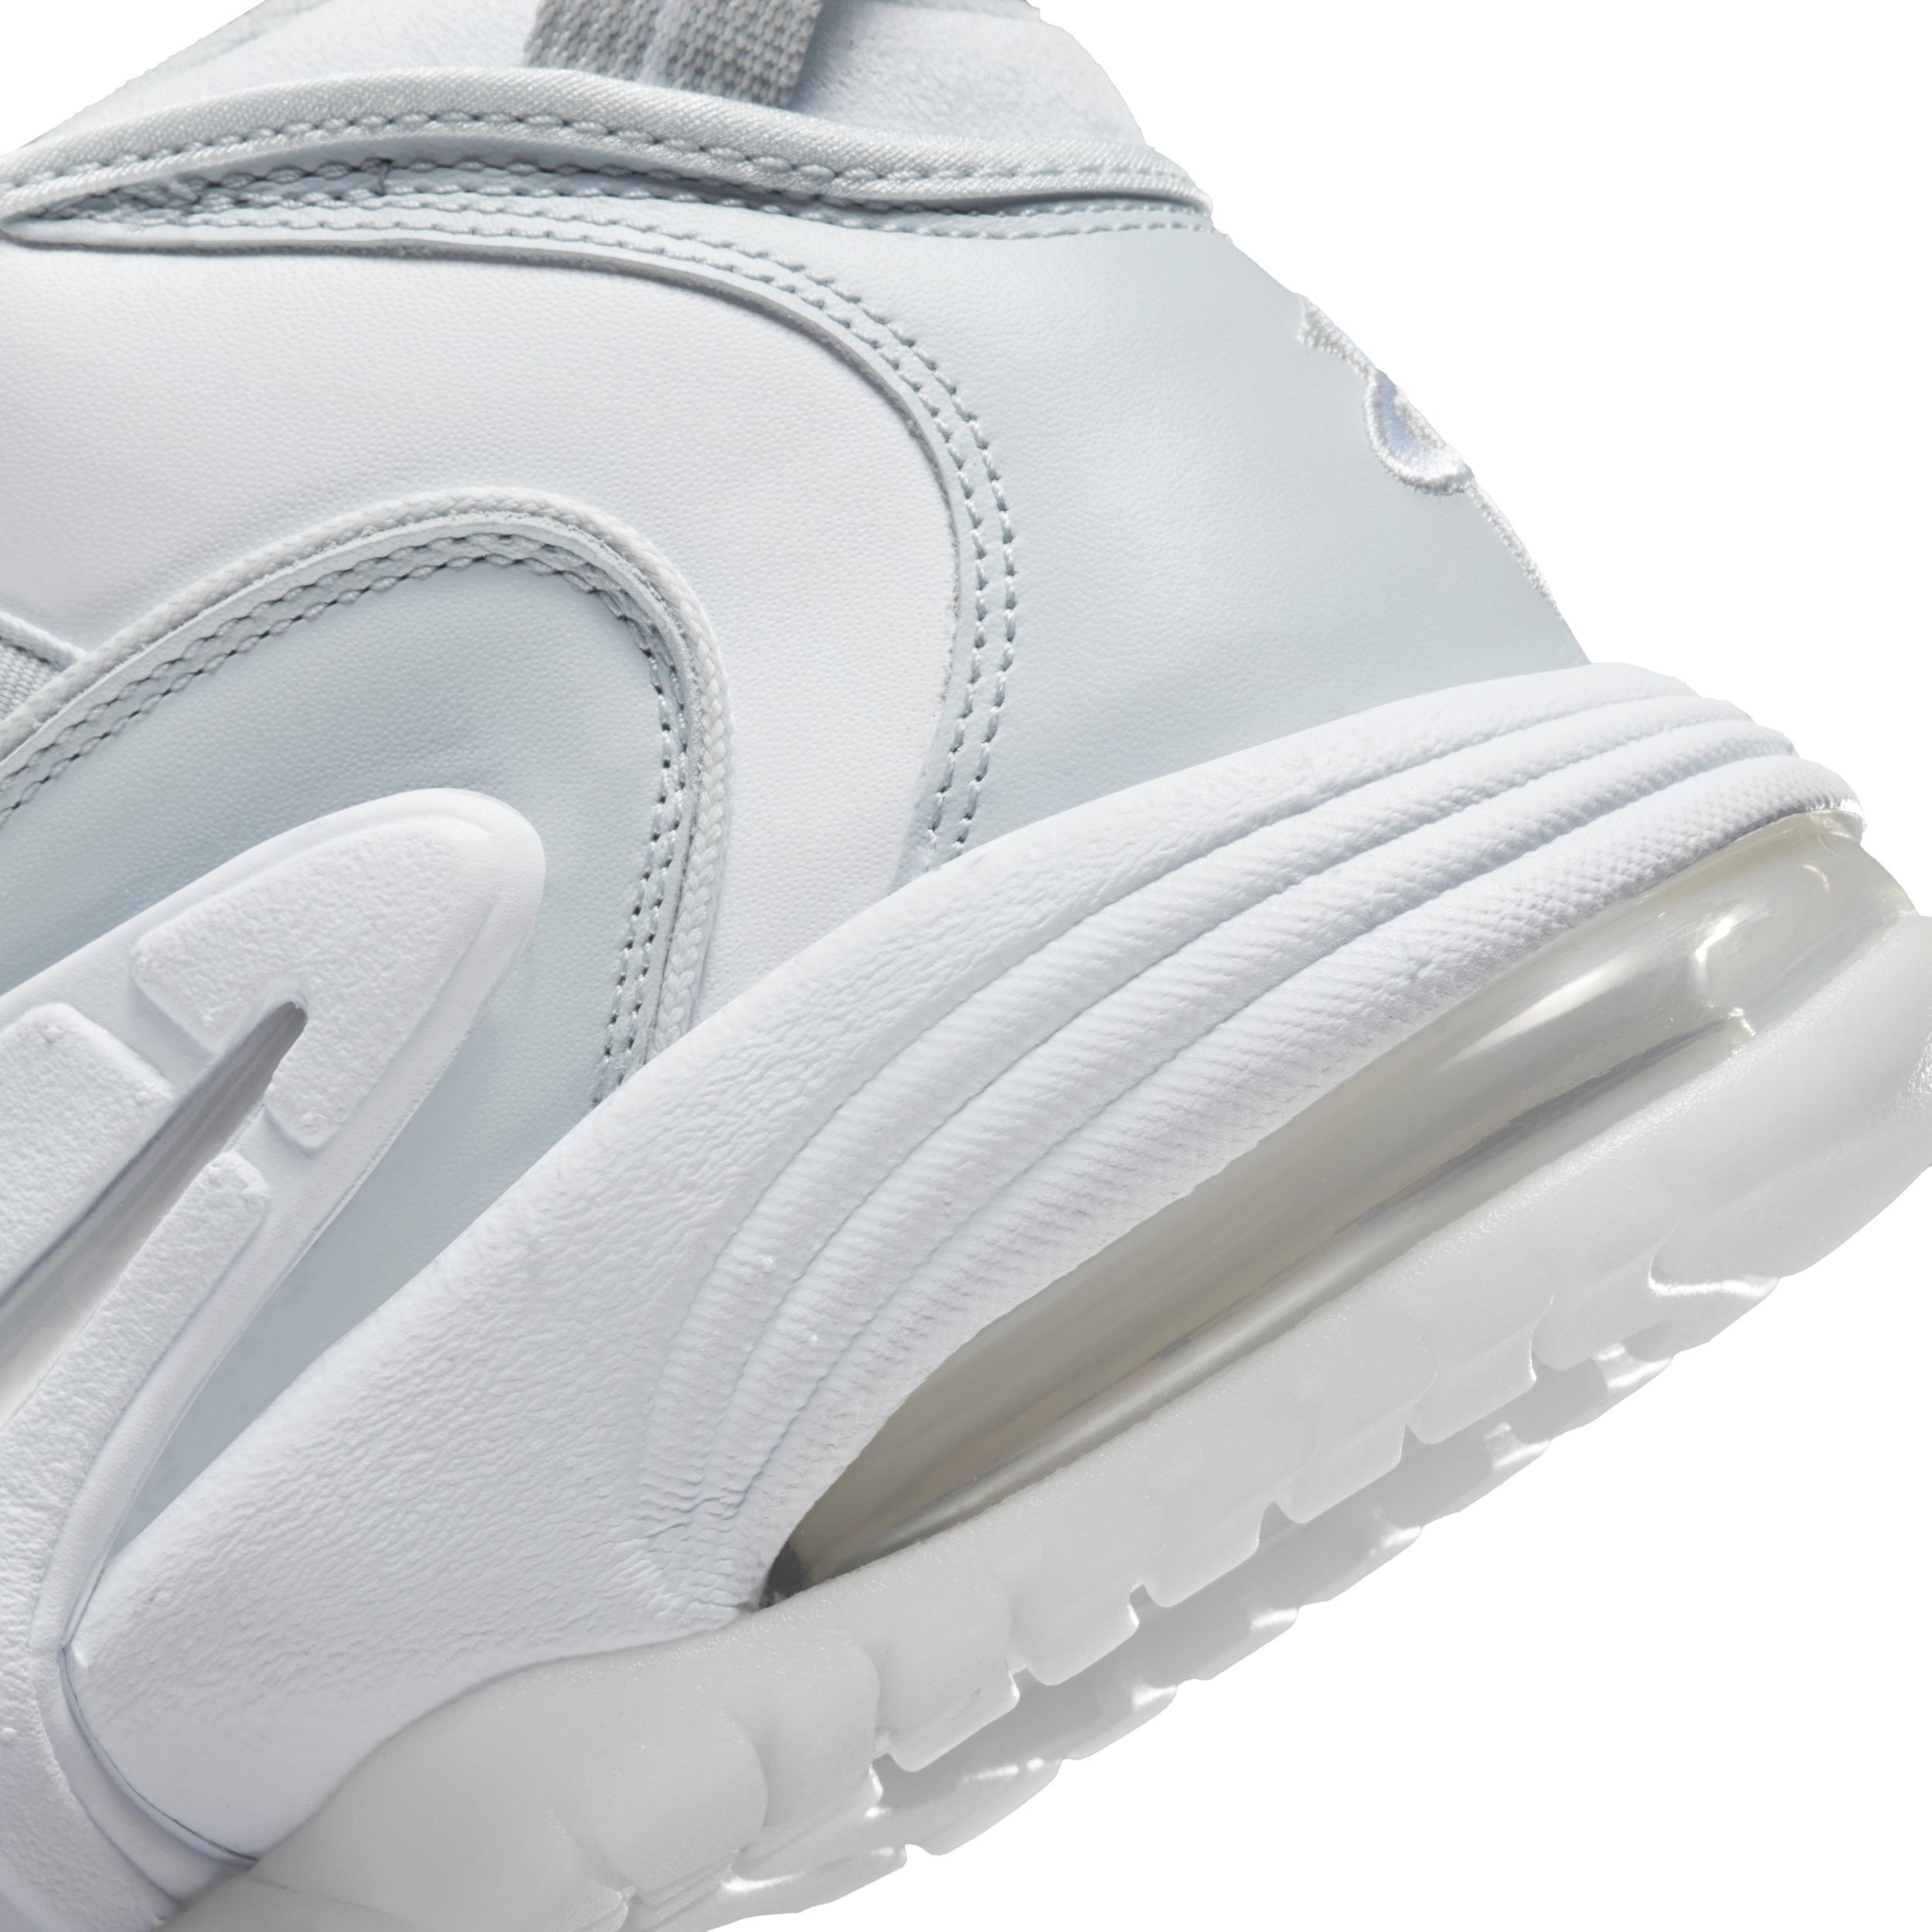 Nike Men's Air Max Penny Shoes Product Image